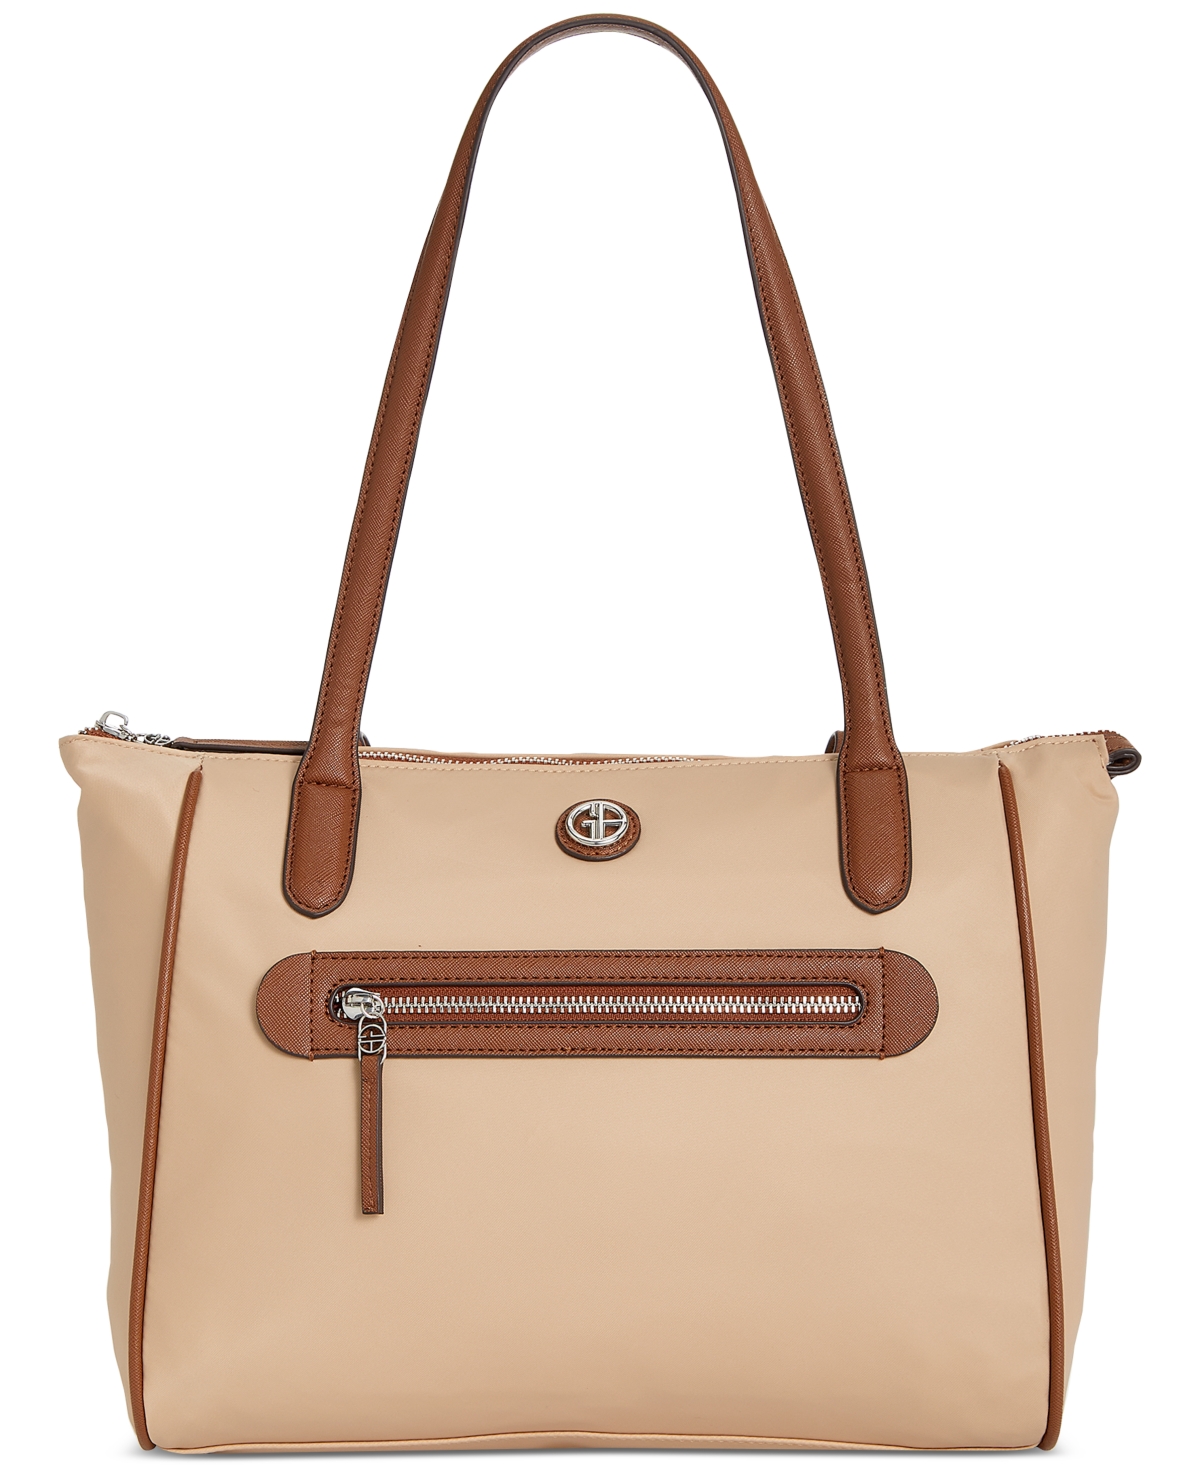 Nylon Tote, Created for Macy's - Almond Flax